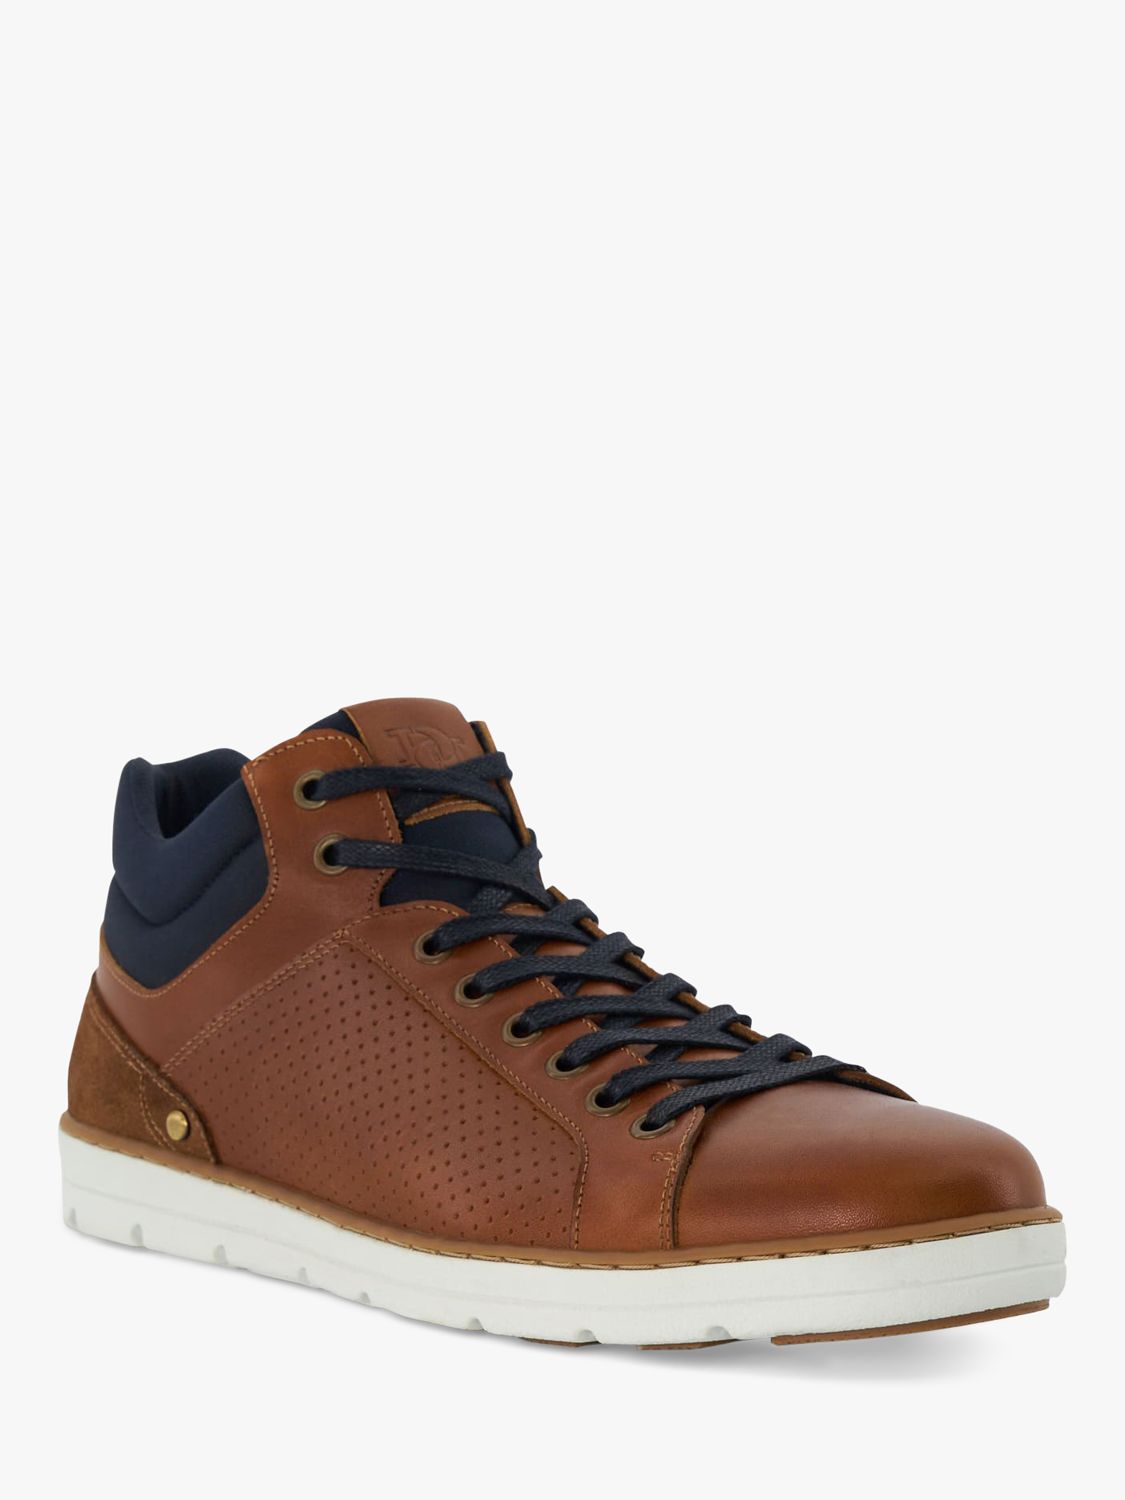 Dune Southern Leather Hi-Top Trainers, Tan at John Lewis & Partners